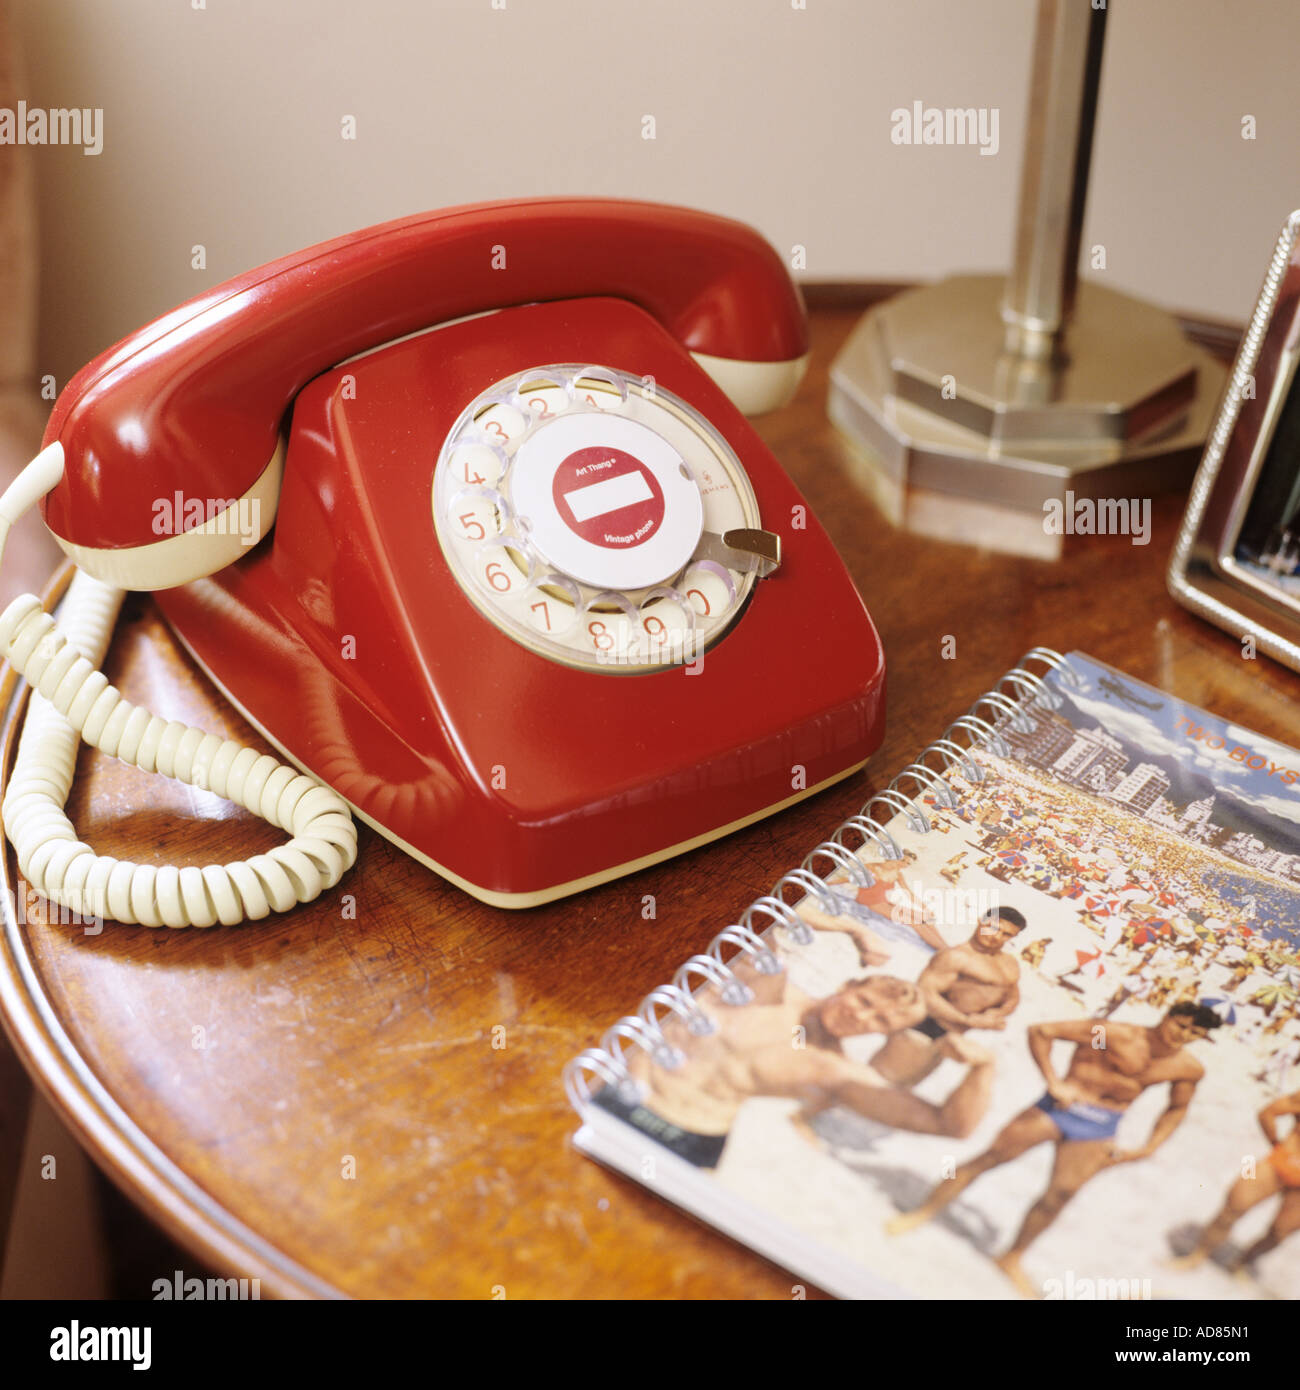 Vintage red telephone on wooden round table Stock Photo